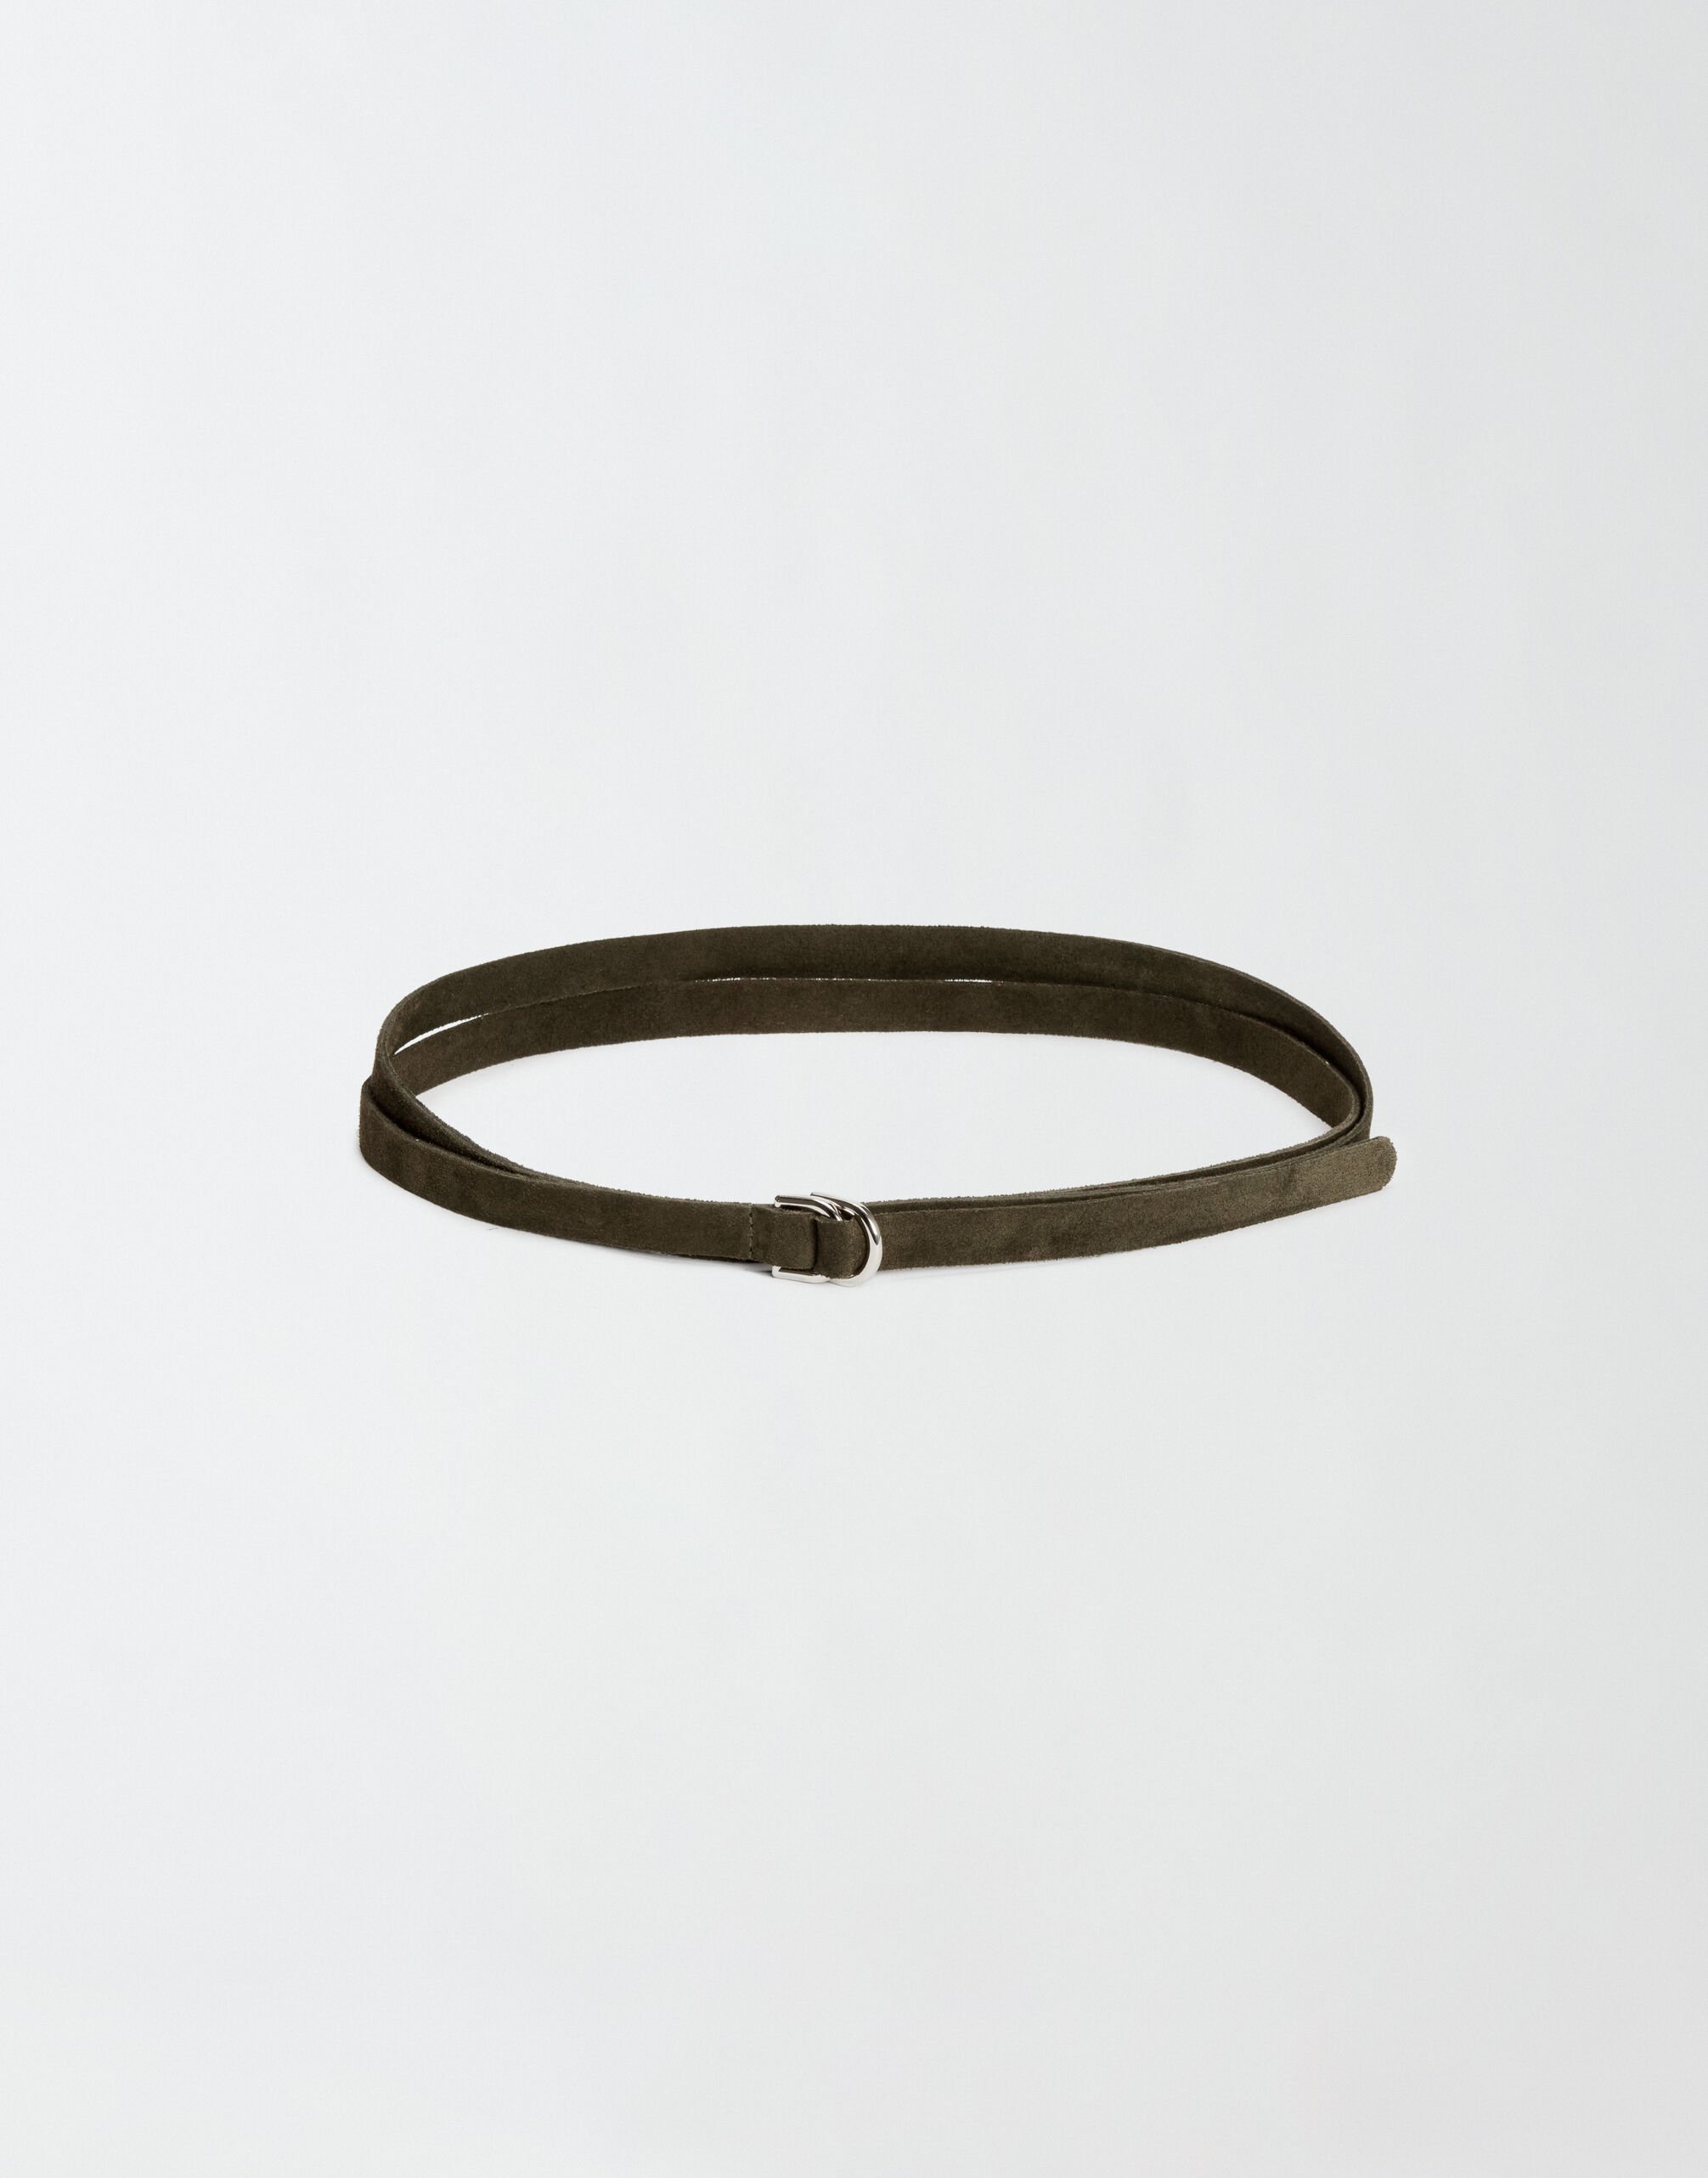 ${brand} SUEDE DOUBLE TOUR BELT WITH RING BUCKLE ${colorDescription} ${masterID}